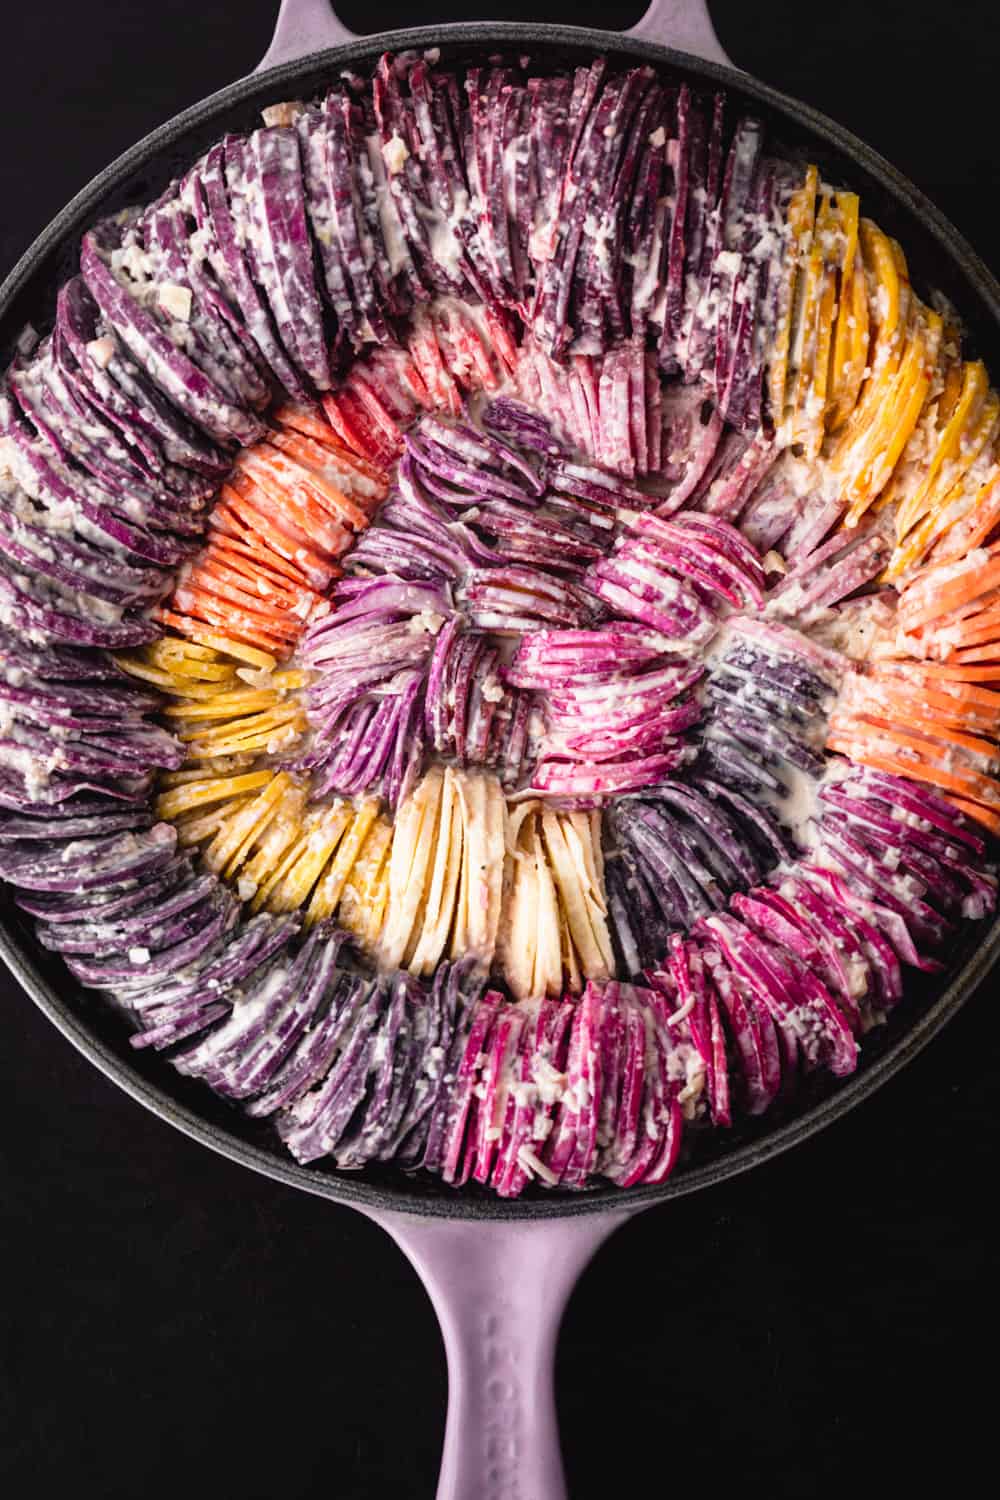 Rainbow root veggies including carrots, beets, potatoes, sweet potatoes, radishes and parsnips made into a very colorful hasselback gratin; proven shot.